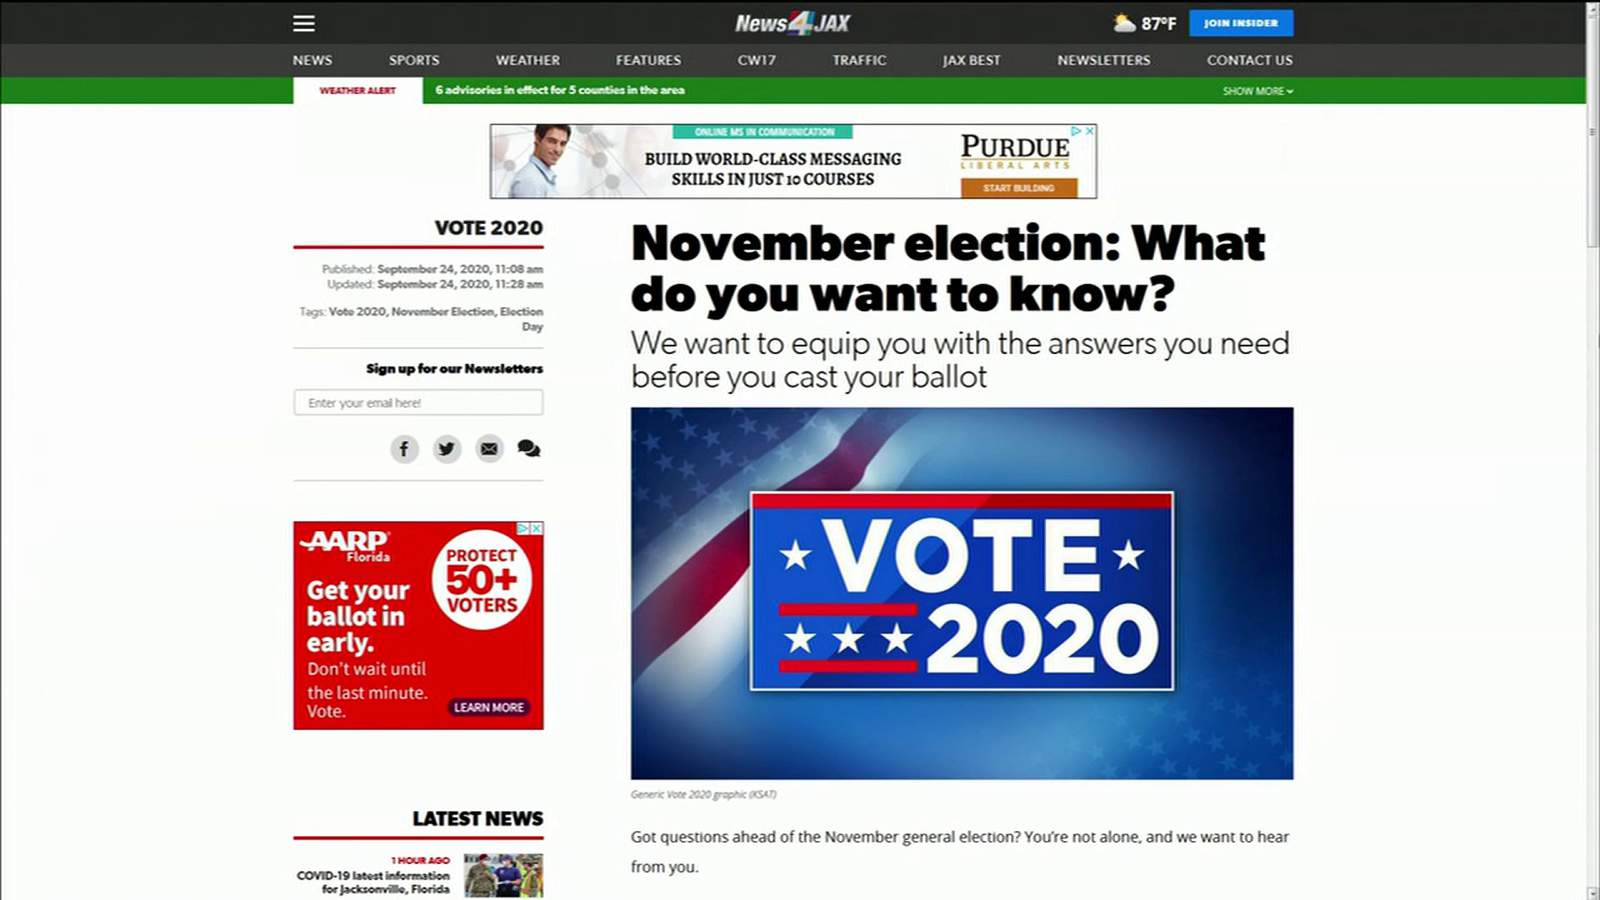 What questions do you have ahead of November's election?